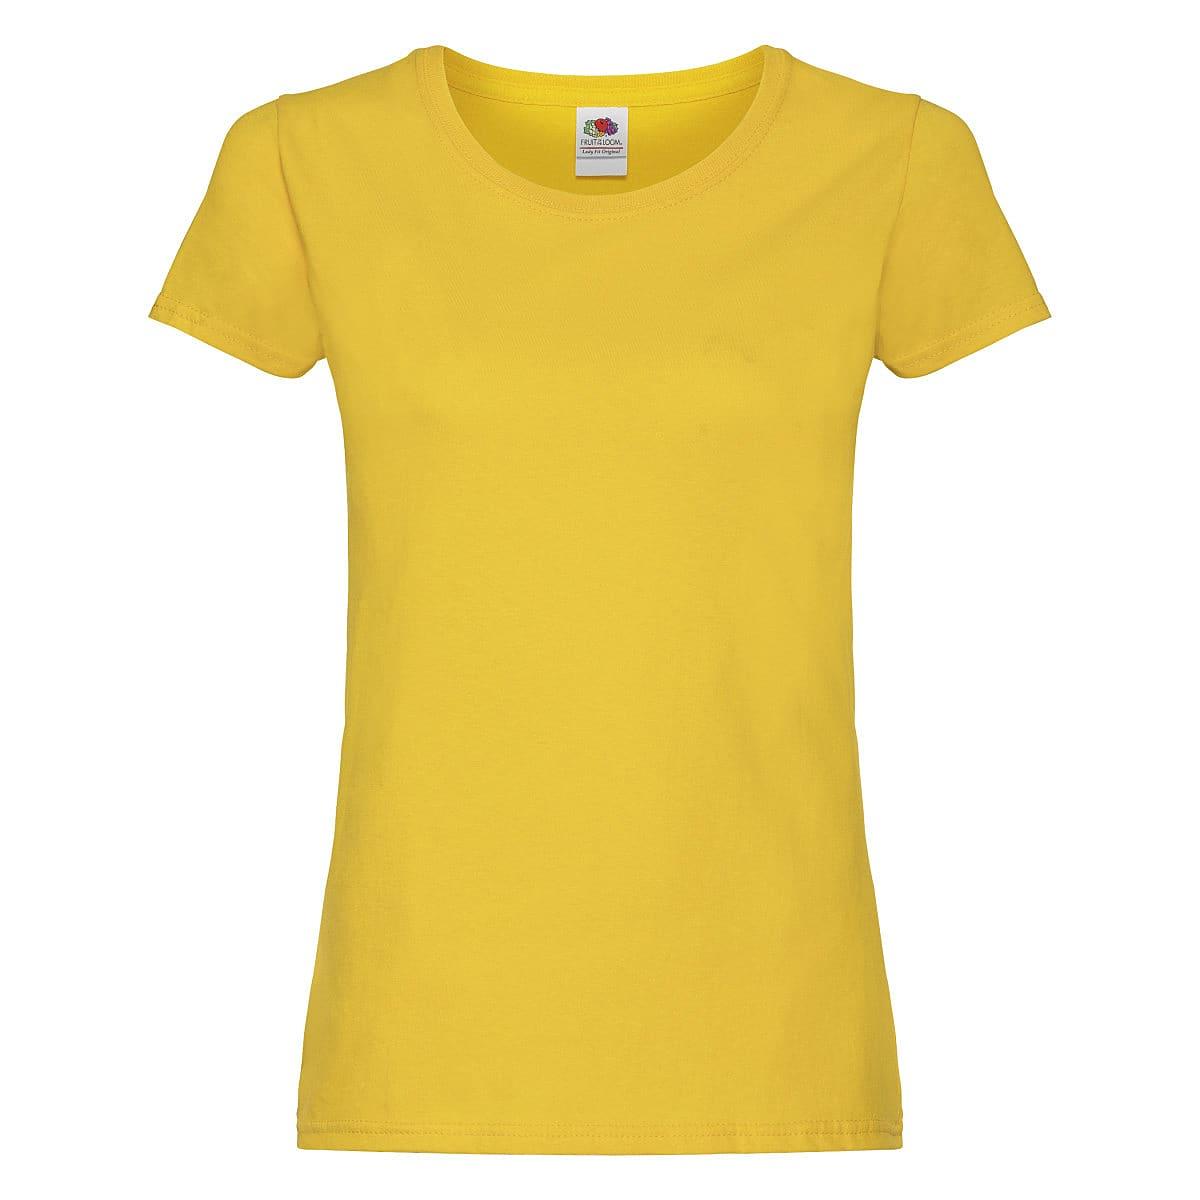 Fruit Of The Loom Lady Fit Original T-Shirt in Sunflower (Product Code: 61420)